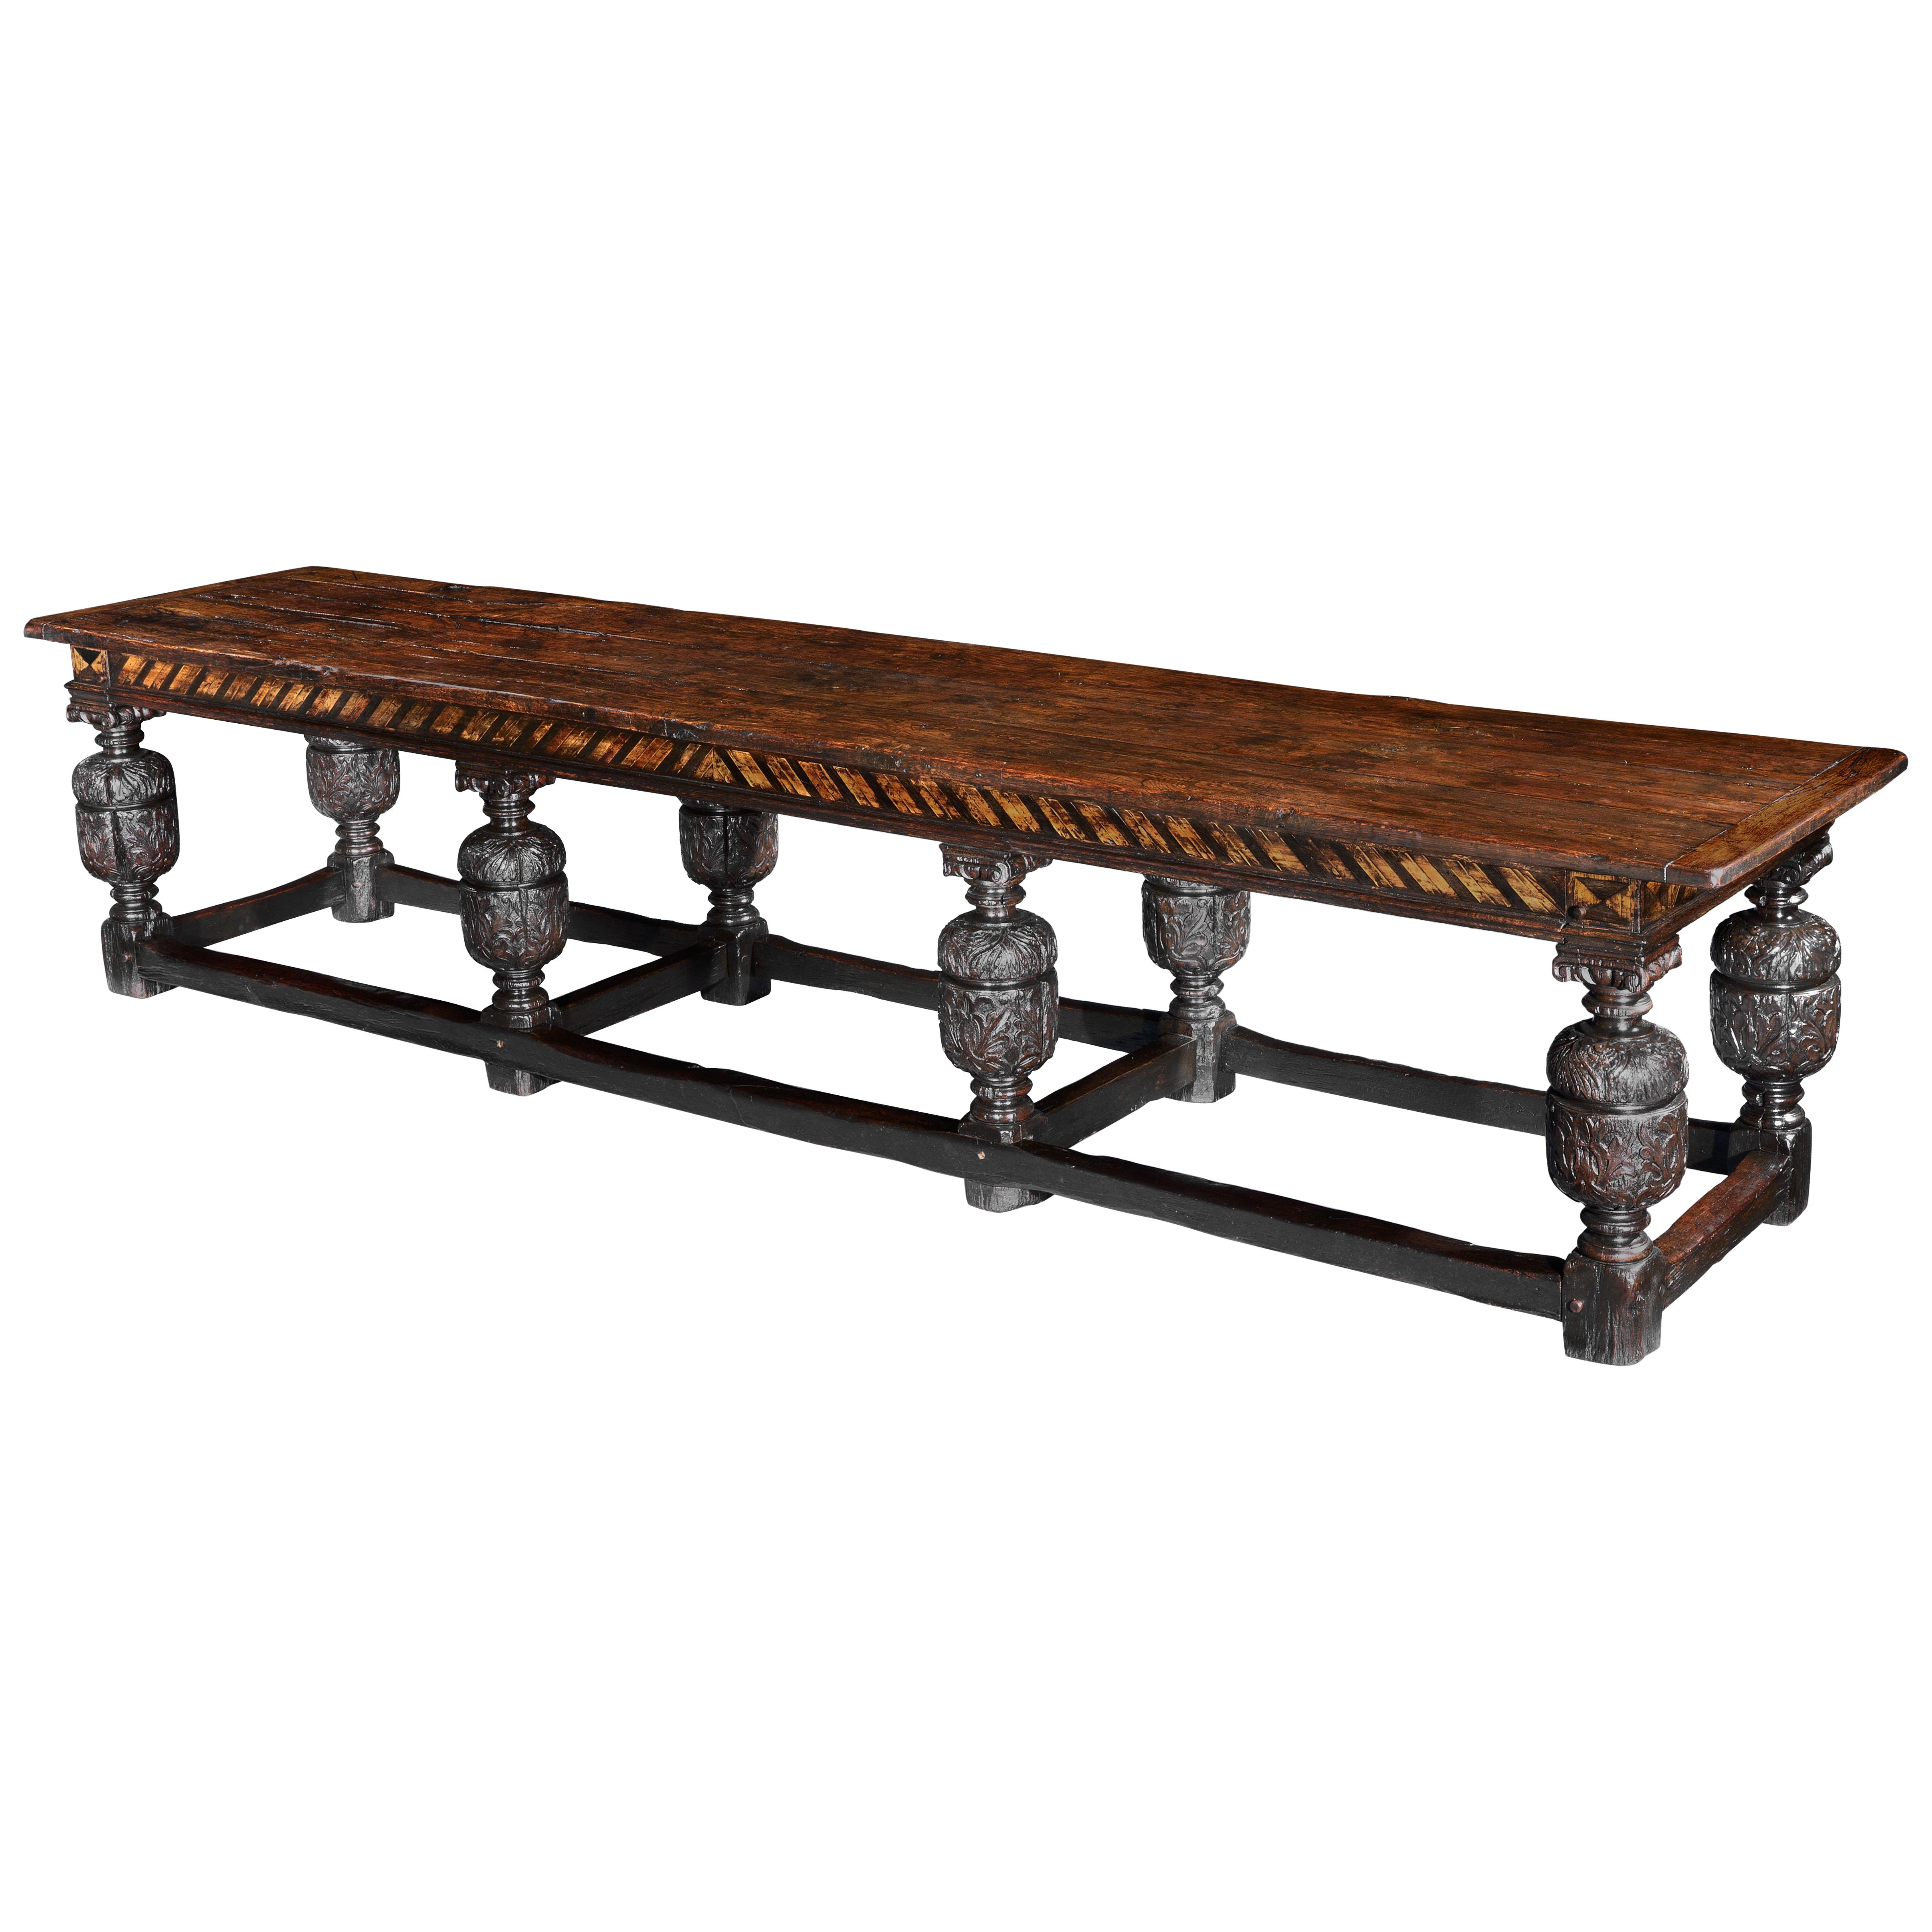 Table Refectory Dining Seats18 Antiquarian Parquetry Elm Oak Box 368cm 145" long